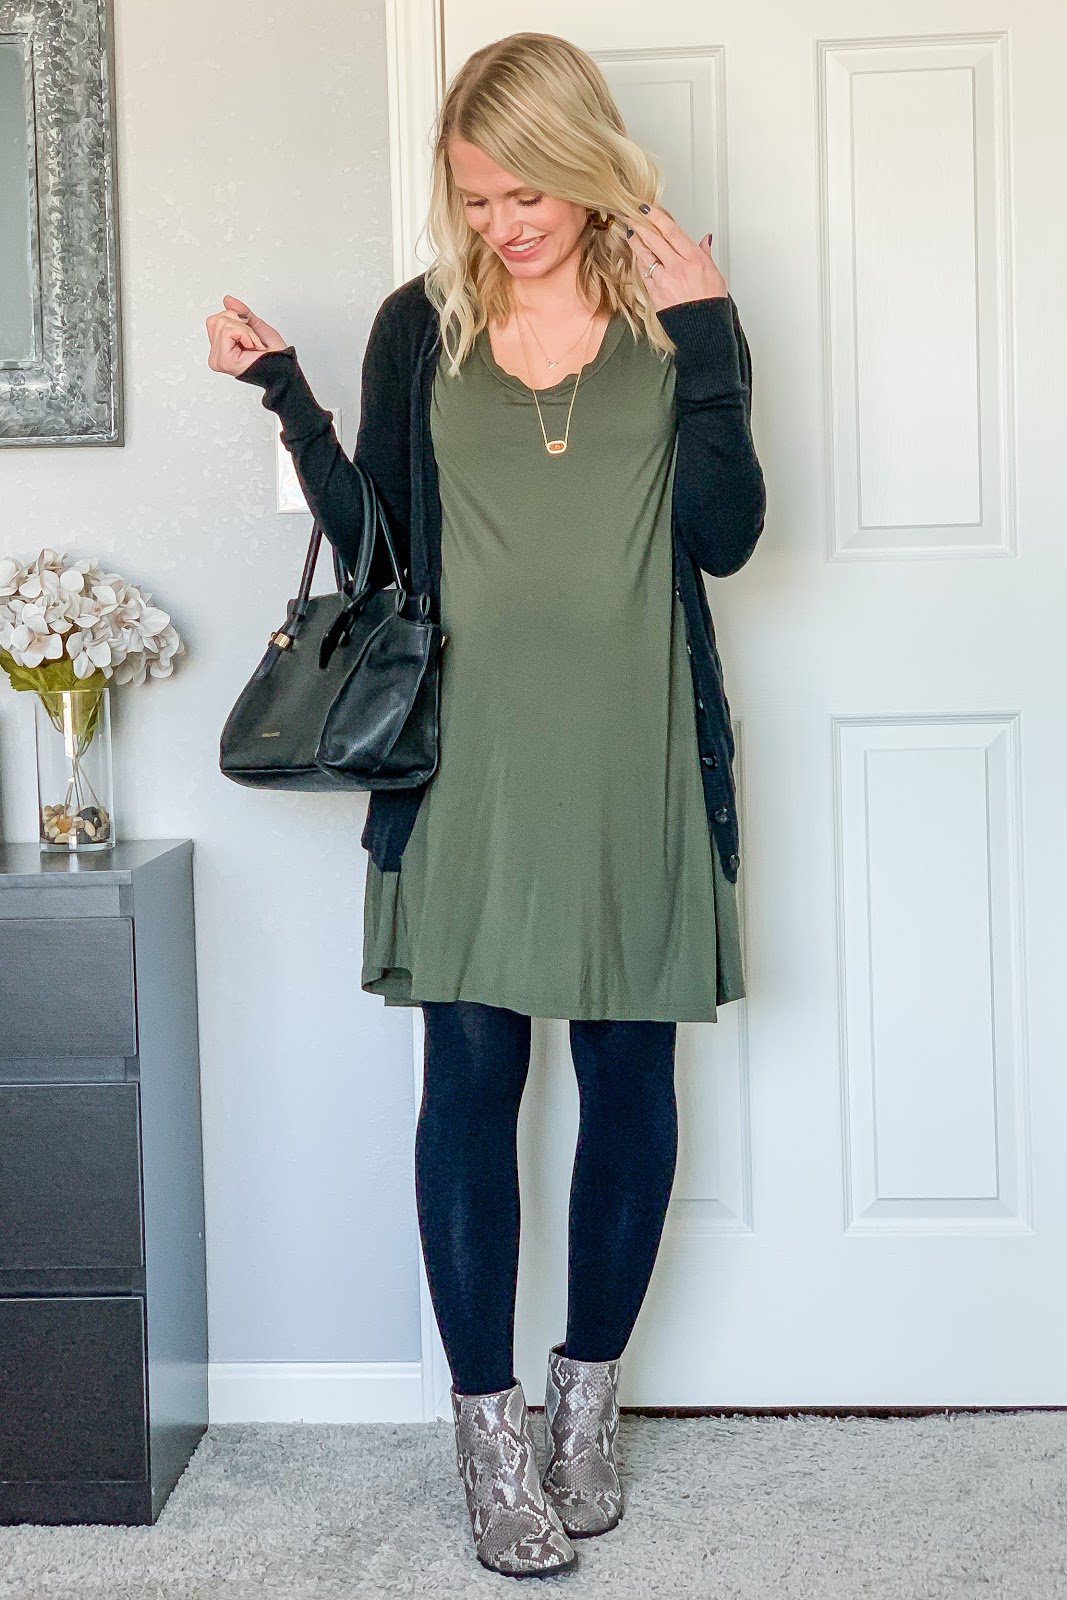 Swingy Spring Tunic and Leggings is the Perfect Pair This Season - Mission:  to Save